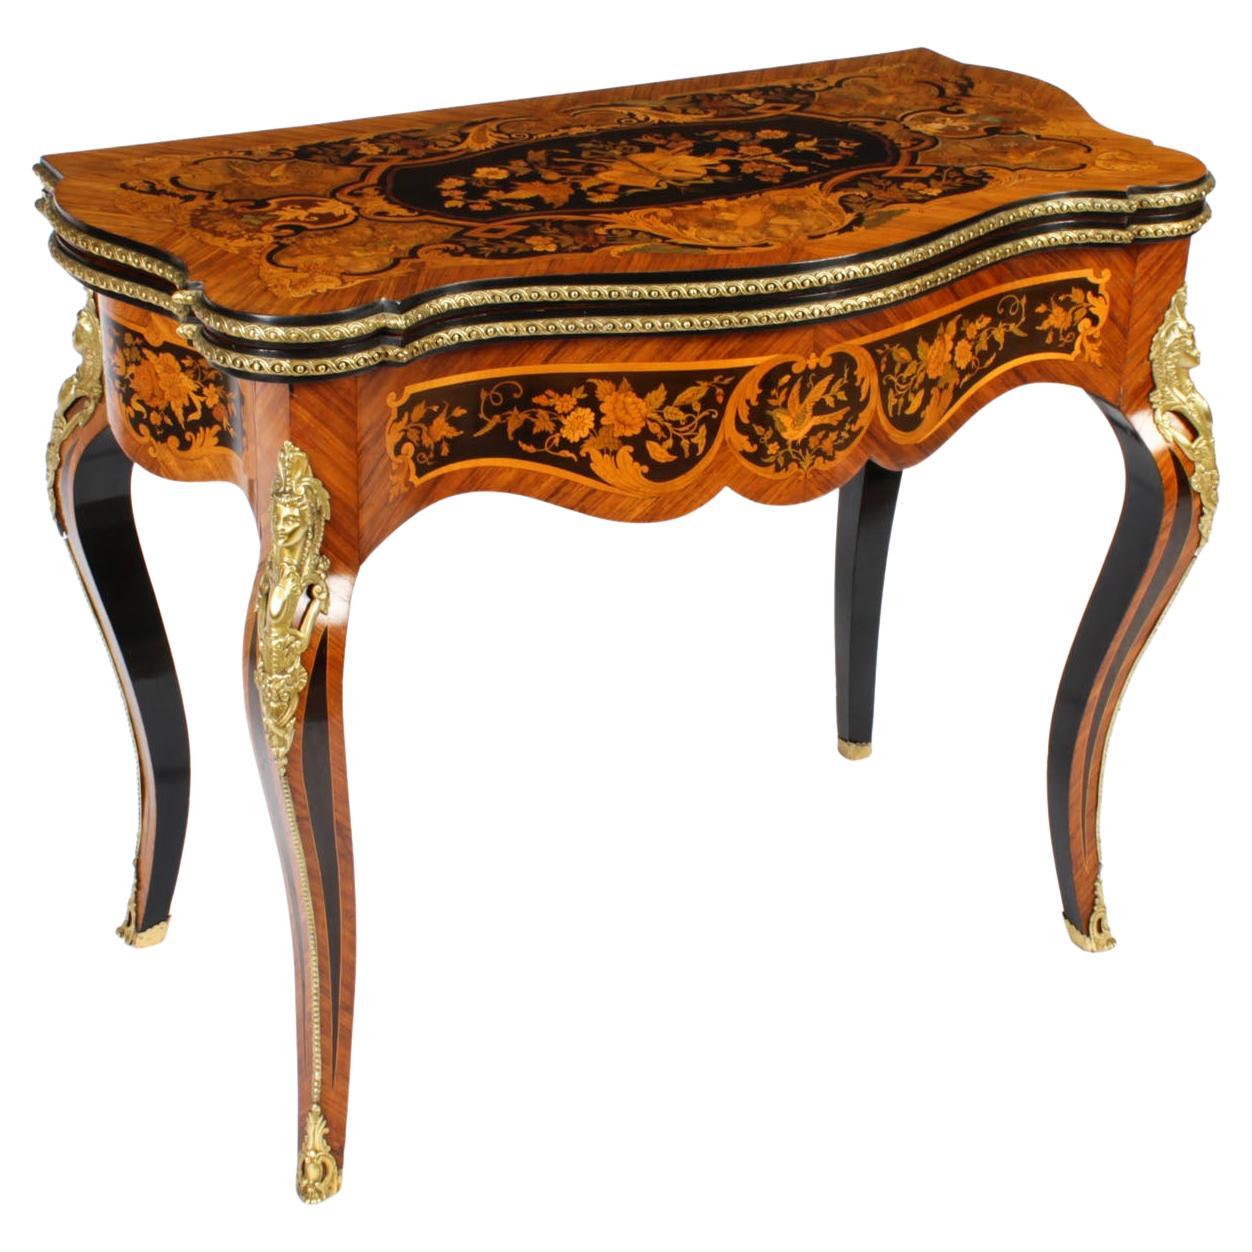 Antique French Louis Revival Floral Marquetry Card Table 19th C For Sale